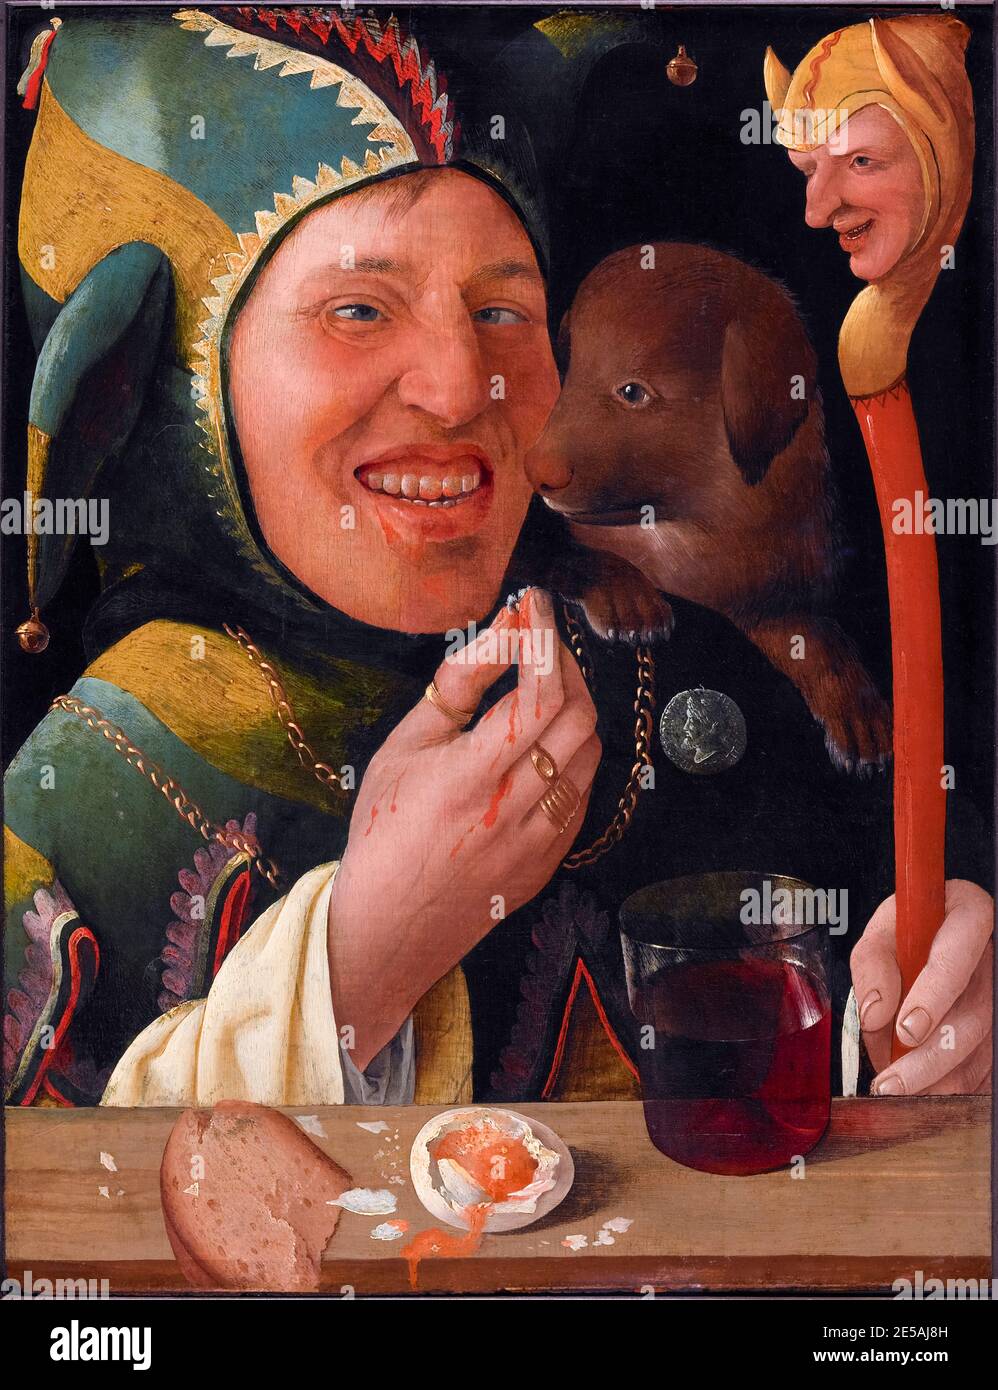 Marx Reichlich, The Jester, painting, 1519-1520 Stock Photo